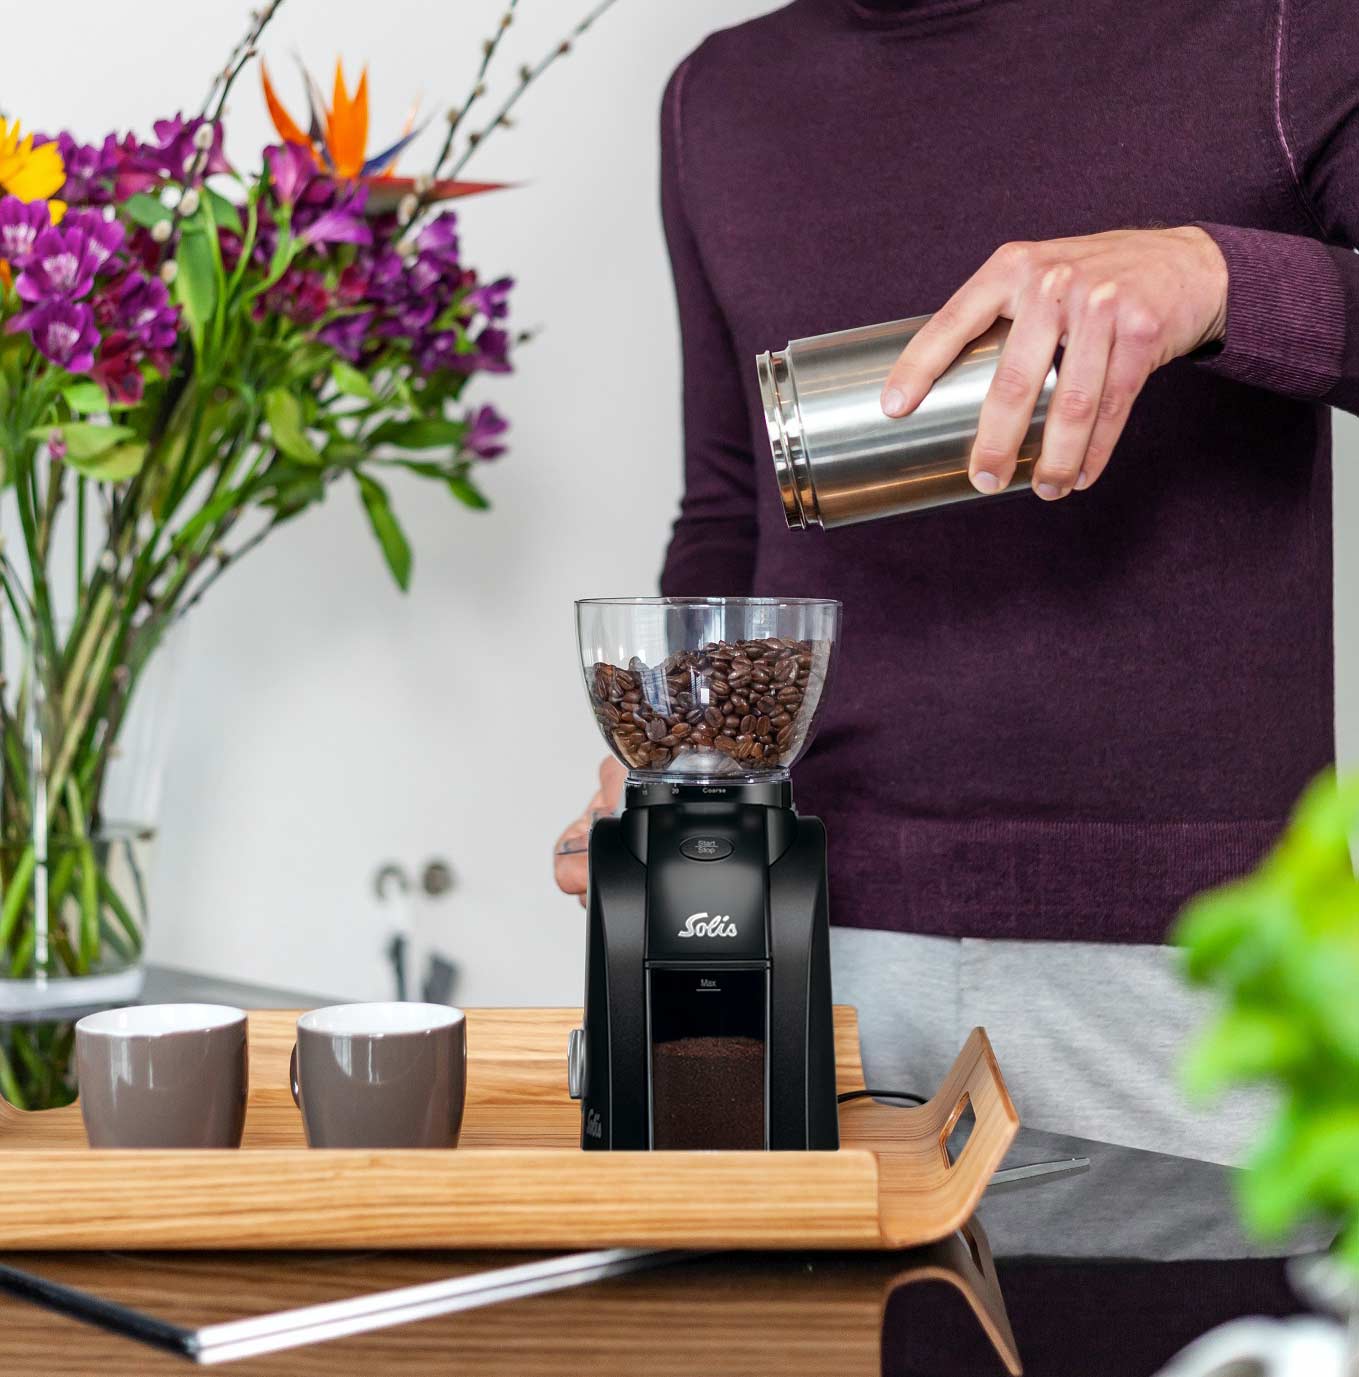 Why should you own a coffee grinder?